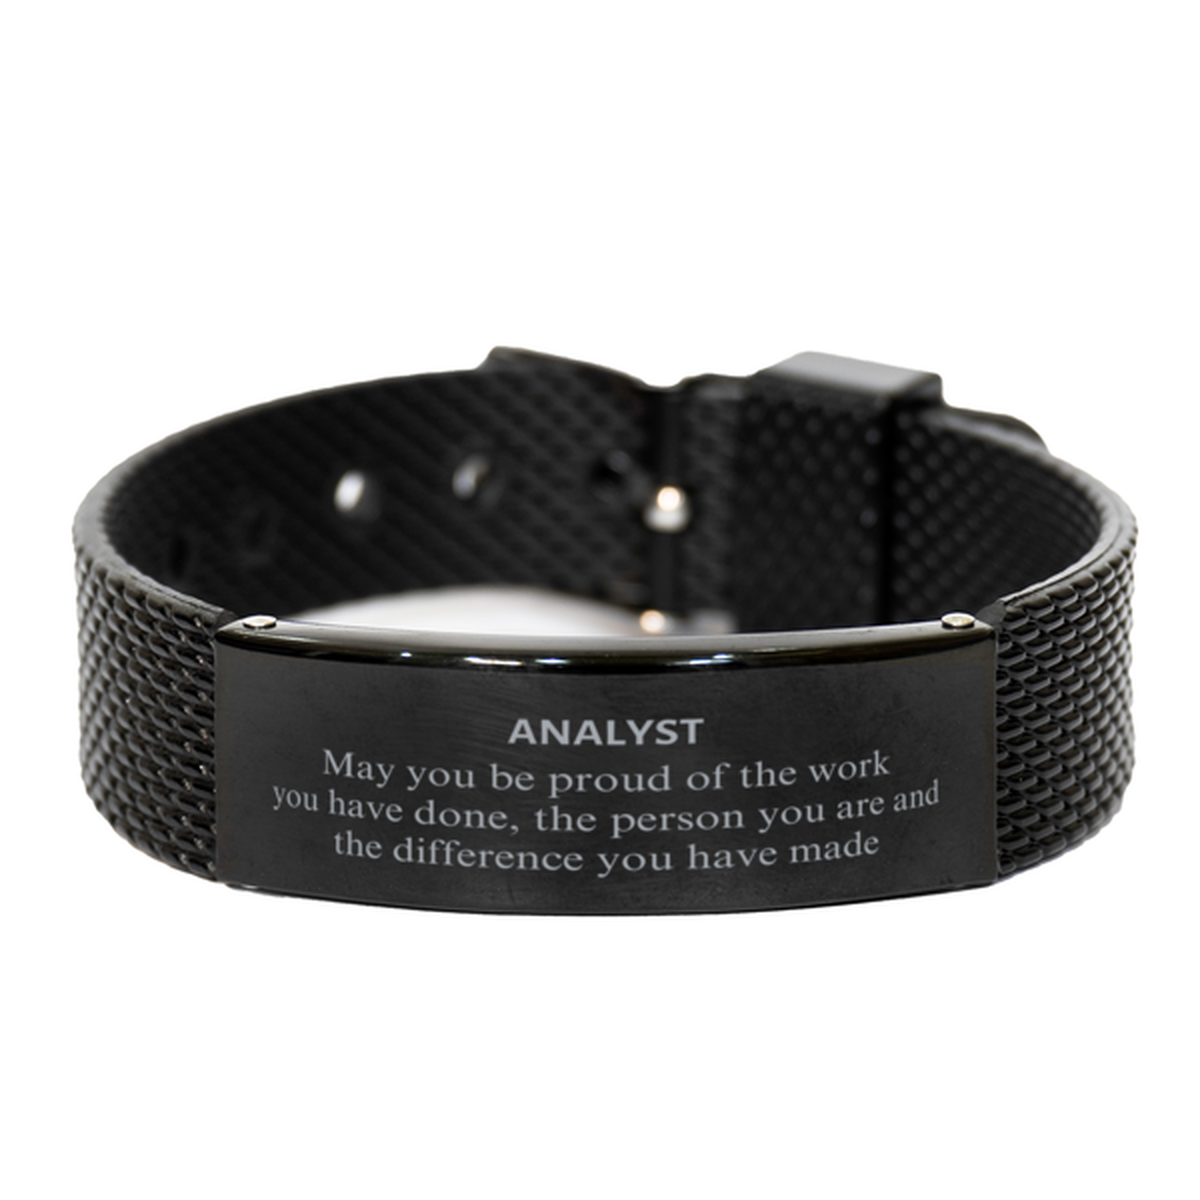 Analyst May you be proud of the work you have done, Retirement Analyst Black Shark Mesh Bracelet for Colleague Appreciation Gifts Amazing for Analyst